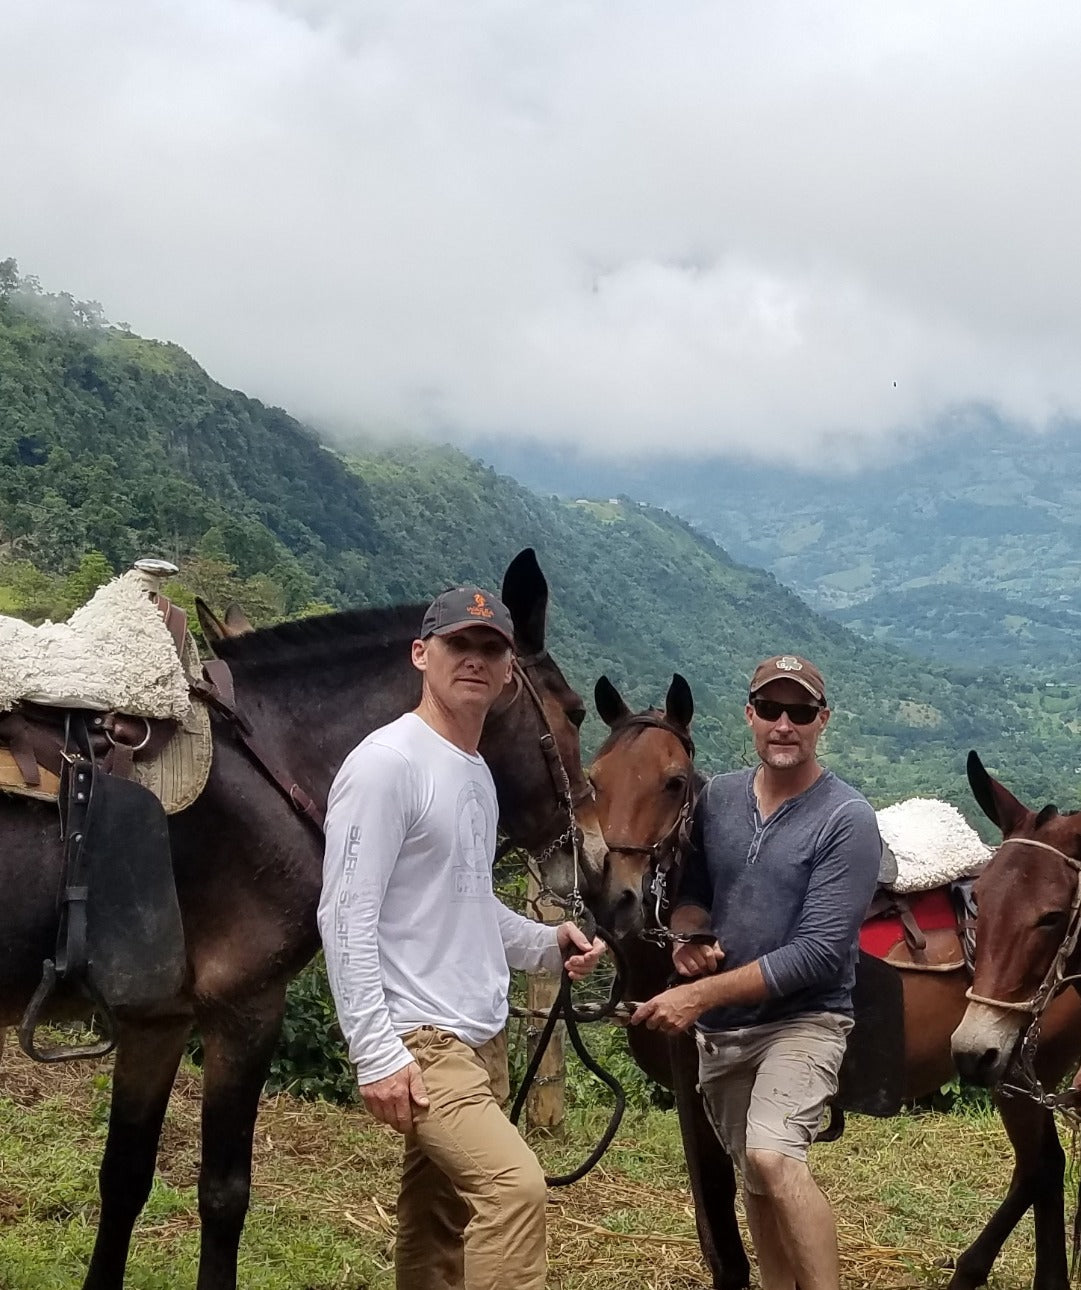 JR and George with horses in Colombia